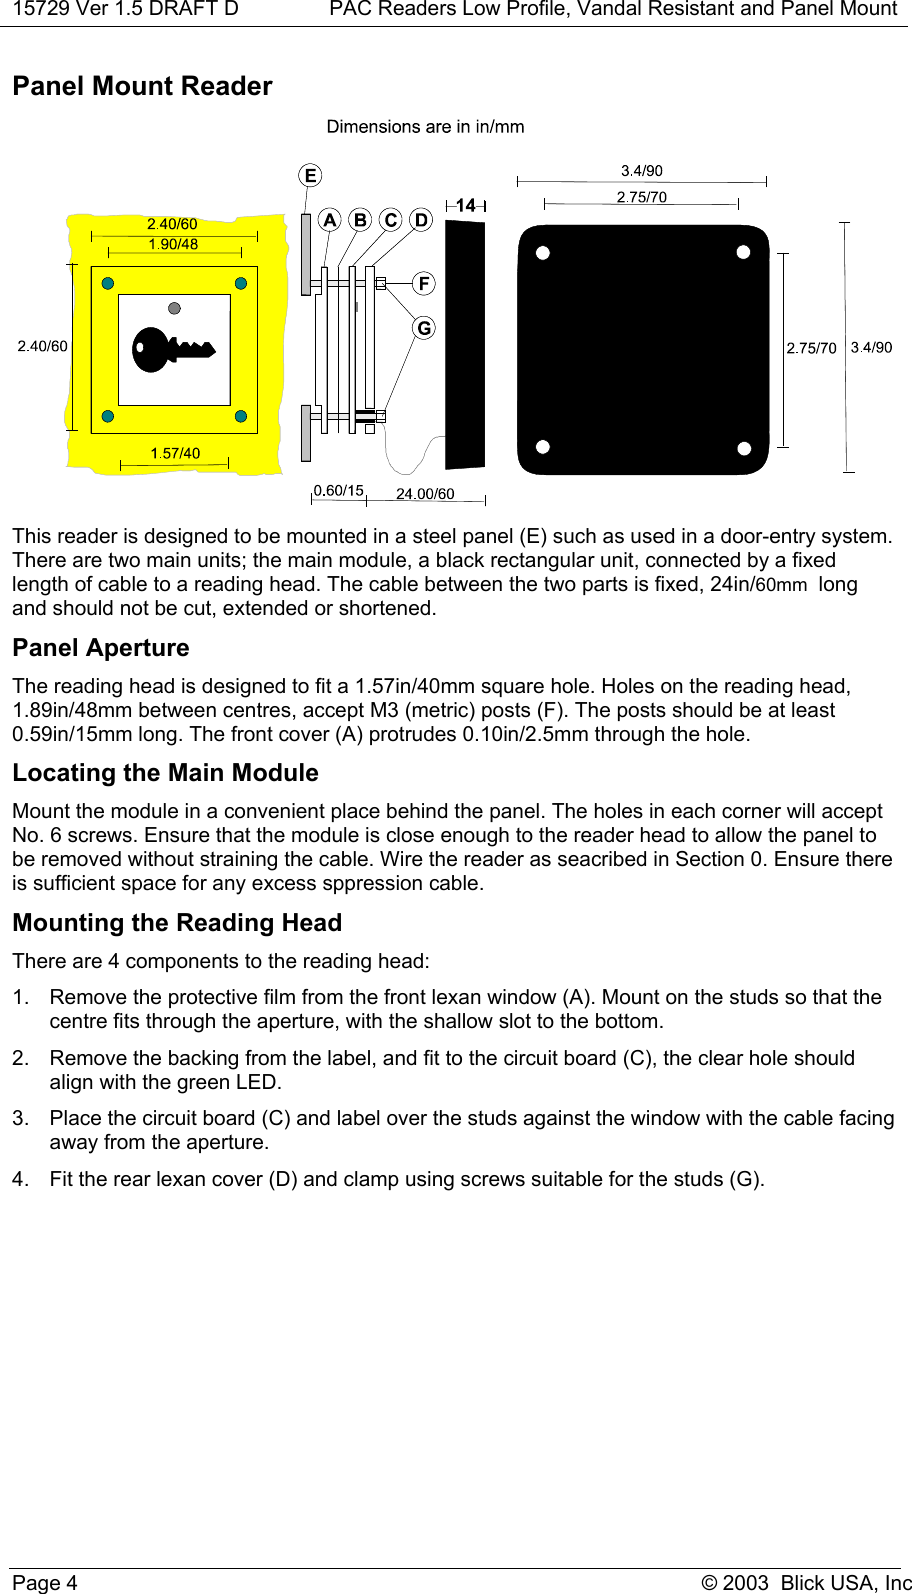 15729 Ver 1.5 DRAFT D PAC Readers Low Profile, Vandal Resistant and Panel MountPage 4 © 2003  Blick USA, IncPanel Mount ReaderThis reader is designed to be mounted in a steel panel (E) such as used in a door-entry system.There are two main units; the main module, a black rectangular unit, connected by a fixedlength of cable to a reading head. The cable between the two parts is fixed, 24in/60mm  longand should not be cut, extended or shortened.Panel ApertureThe reading head is designed to fit a 1.57in/40mm square hole. Holes on the reading head,1.89in/48mm between centres, accept M3 (metric) posts (F). The posts should be at least0.59in/15mm long. The front cover (A) protrudes 0.10in/2.5mm through the hole.Locating the Main ModuleMount the module in a convenient place behind the panel. The holes in each corner will acceptNo. 6 screws. Ensure that the module is close enough to the reader head to allow the panel tobe removed without straining the cable. Wire the reader as seacribed in Section 0. Ensure thereis sufficient space for any excess sppression cable.Mounting the Reading HeadThere are 4 components to the reading head:1.  Remove the protective film from the front lexan window (A). Mount on the studs so that thecentre fits through the aperture, with the shallow slot to the bottom.2.  Remove the backing from the label, and fit to the circuit board (C), the clear hole shouldalign with the green LED.3.  Place the circuit board (C) and label over the studs against the window with the cable facingaway from the aperture.4.  Fit the rear lexan cover (D) and clamp using screws suitable for the studs (G).